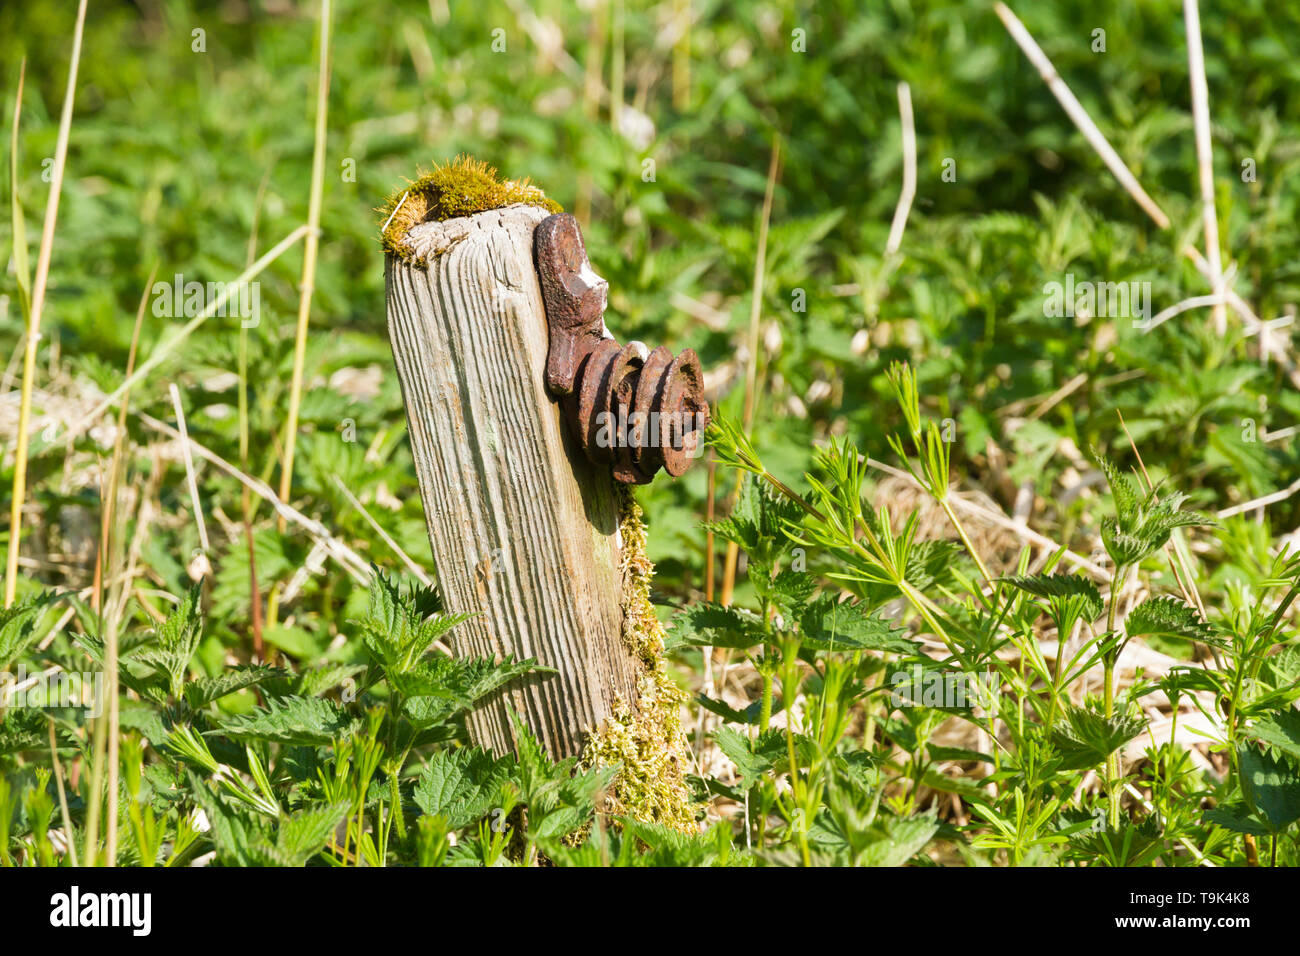 A rusty railway signal cable pulley attached to a worn, partly moss-covered wooden post surrounded by stinging nettles and other weeds. Stock Photo